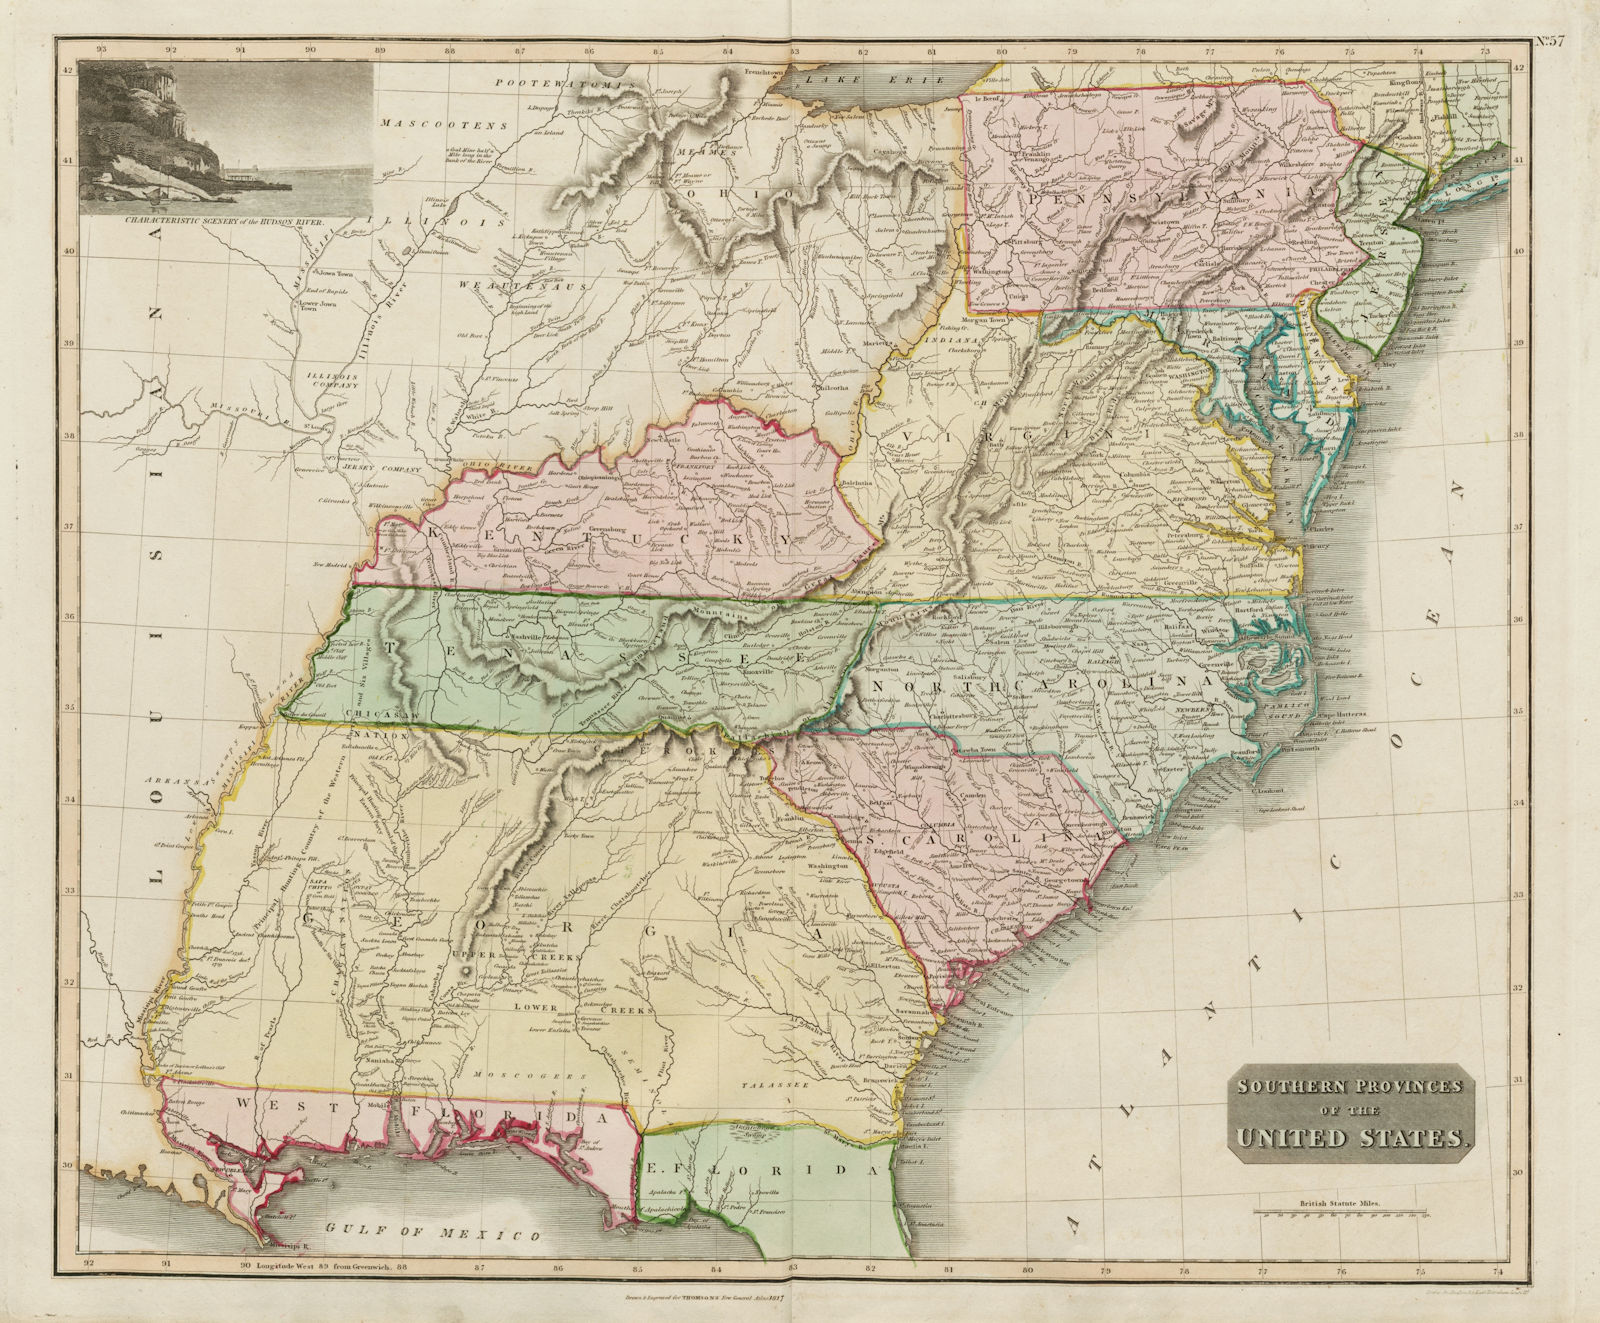 "Southern provinces of the United States". THOMSON. West & East Florida 1817 map